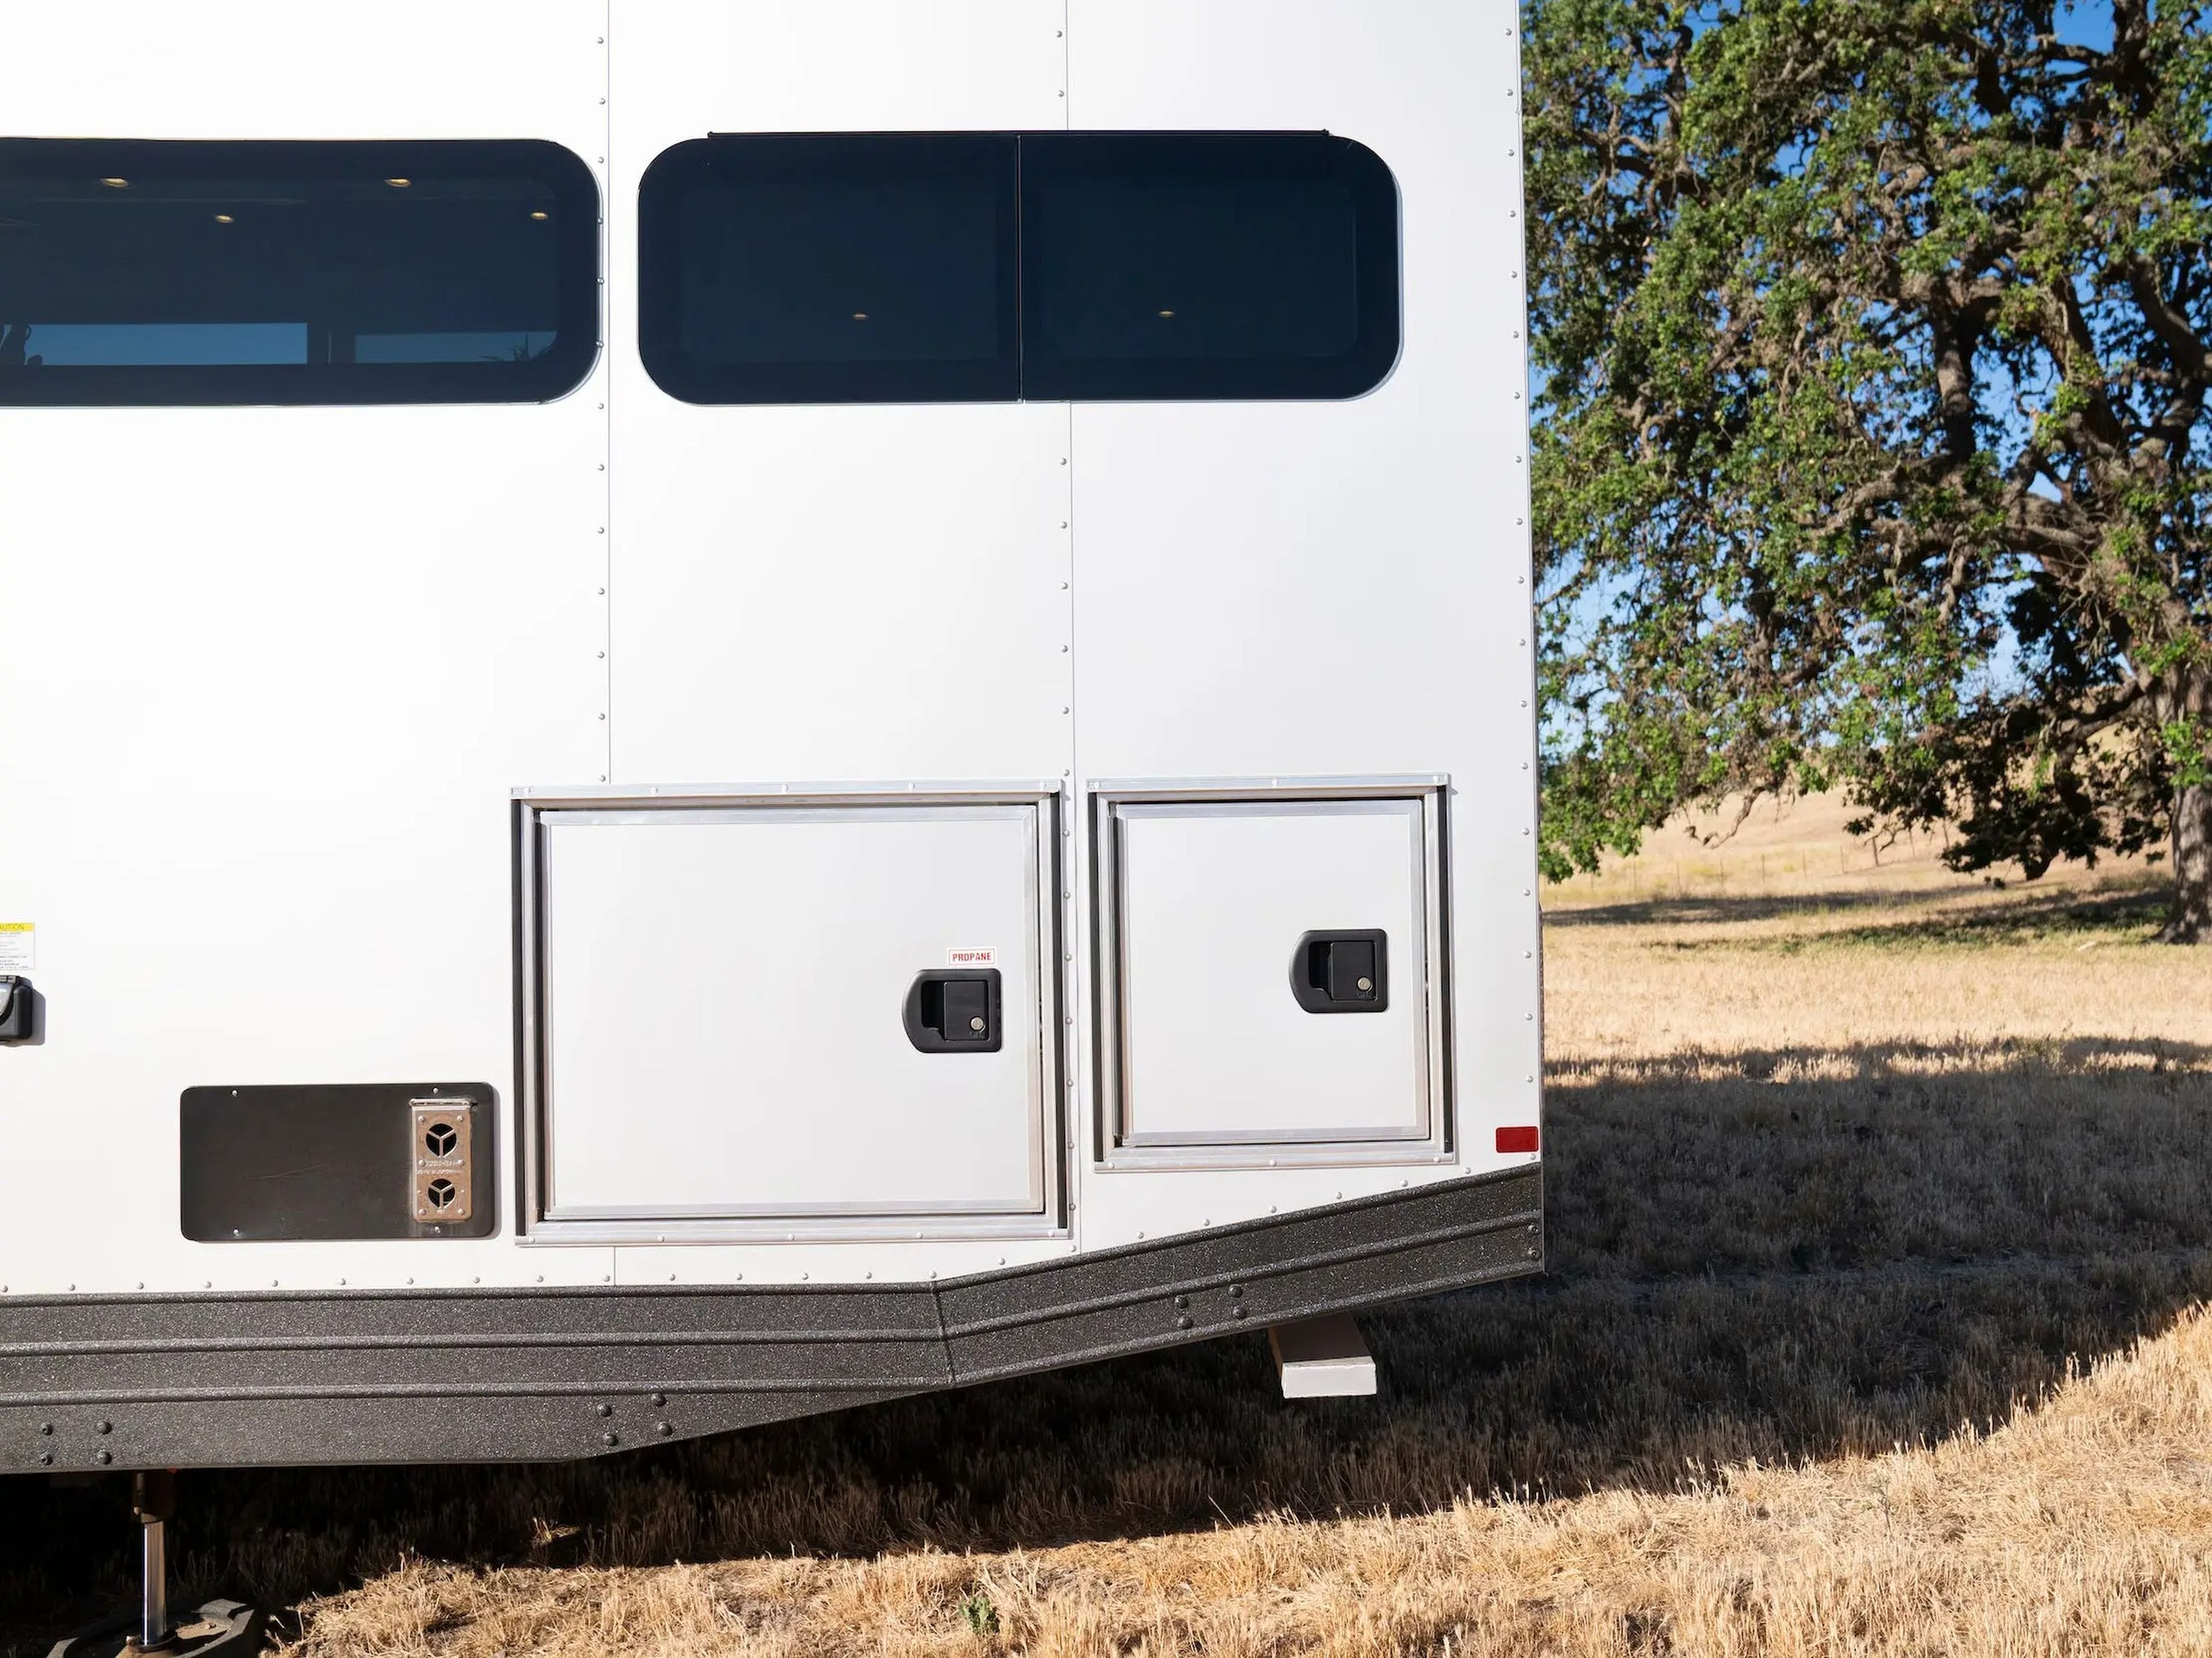 A close up of the exterior of the travel trailer with storage units.